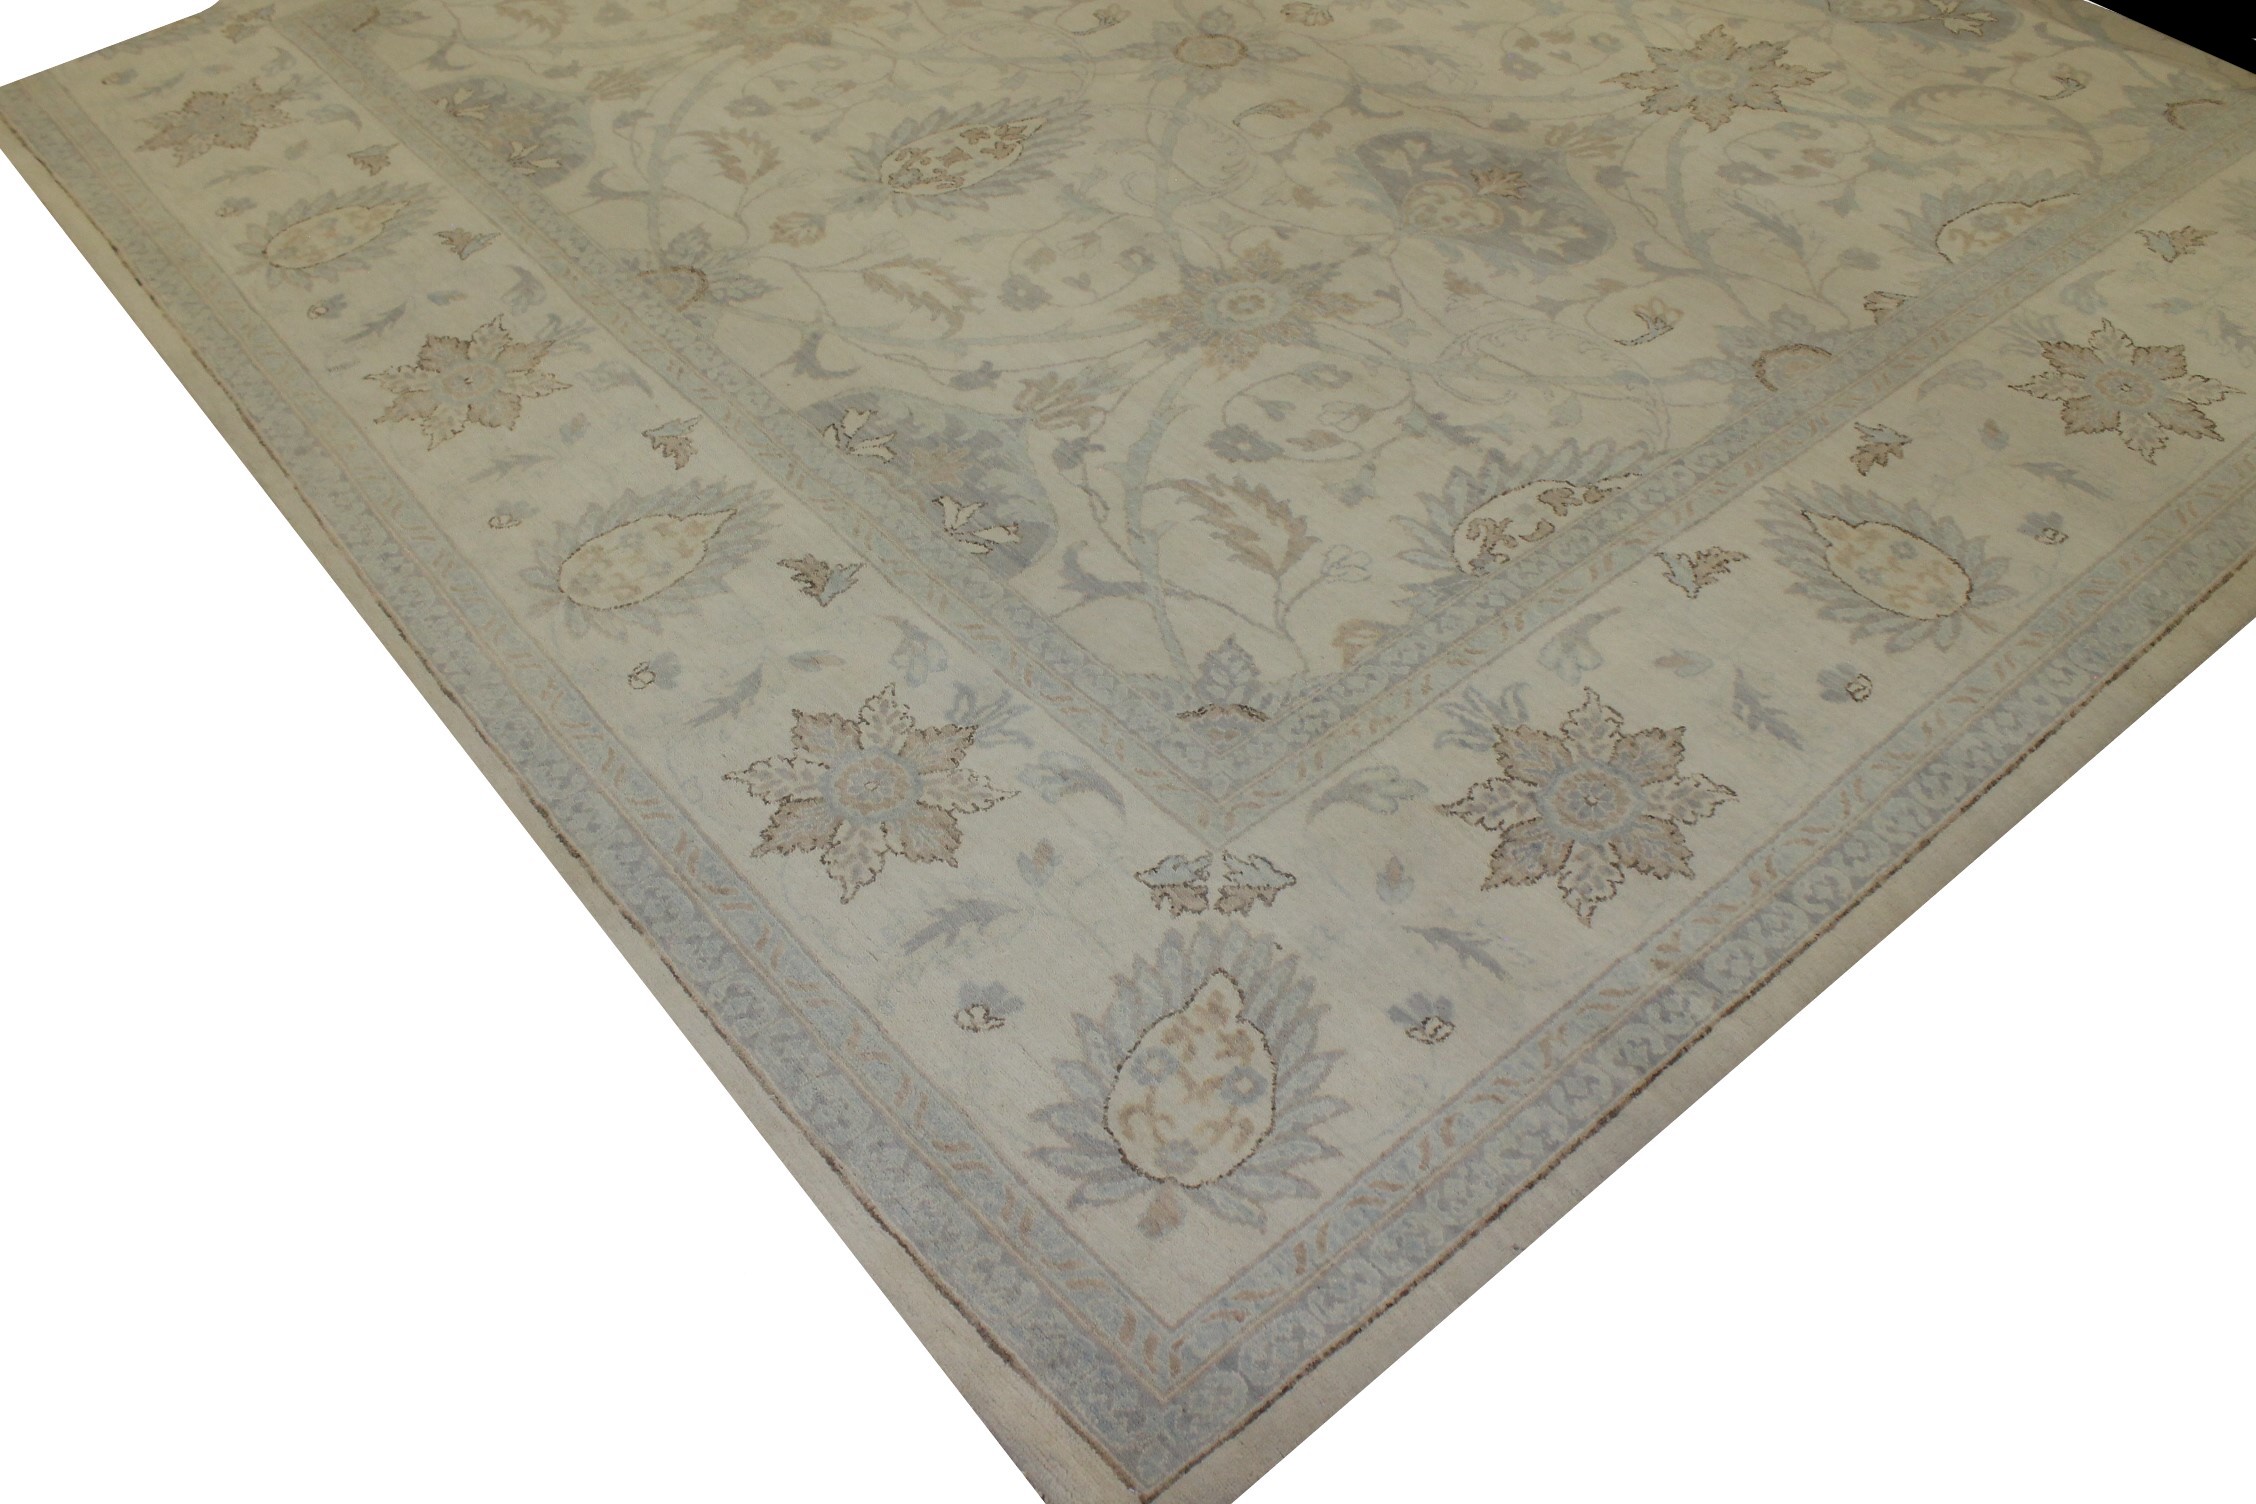 10x14 Antique Revival Hand Knotted Wool Area Rug - MR19114